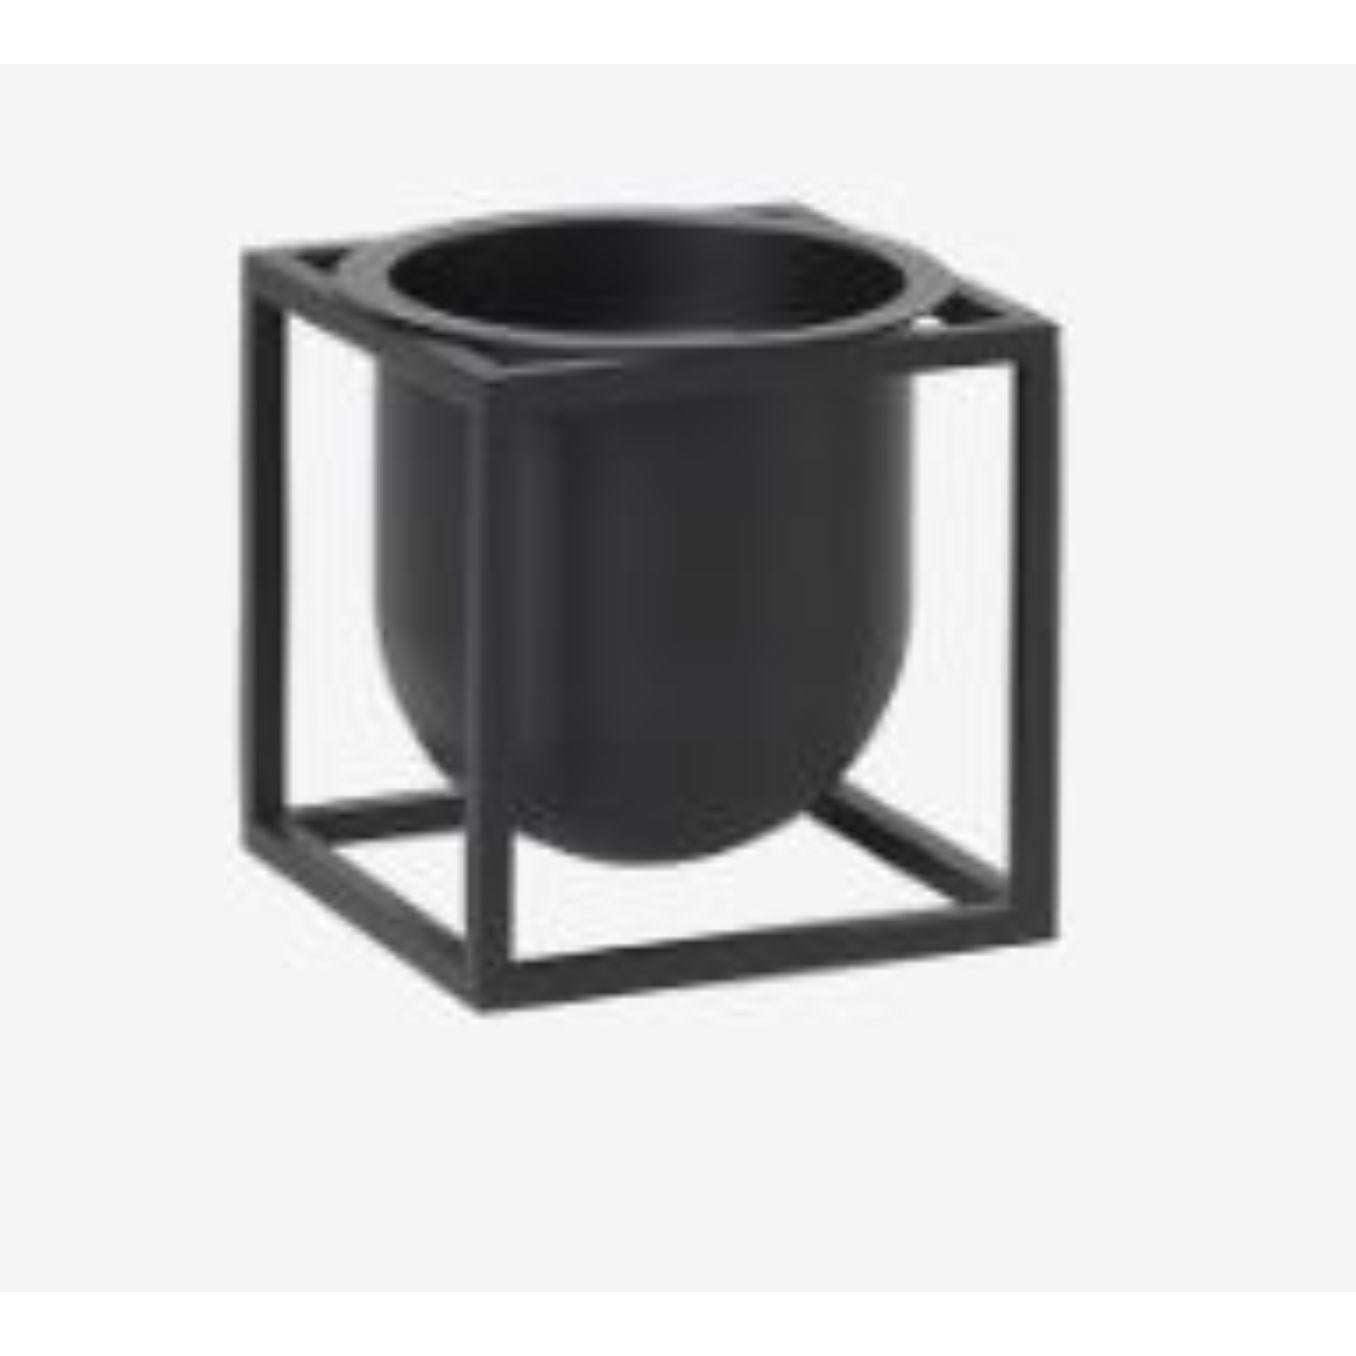 Black flowerpot 10 Kubus vase by Lassen
Dimensions: D 10 x W 10 x H 10 cm 
Materials: Metal 
Weight: 0.75 Kg

Herb pot, vase or a simple container. The possibilities are endless. Another addition to the Kubus collection, Kubus Flowerpots come